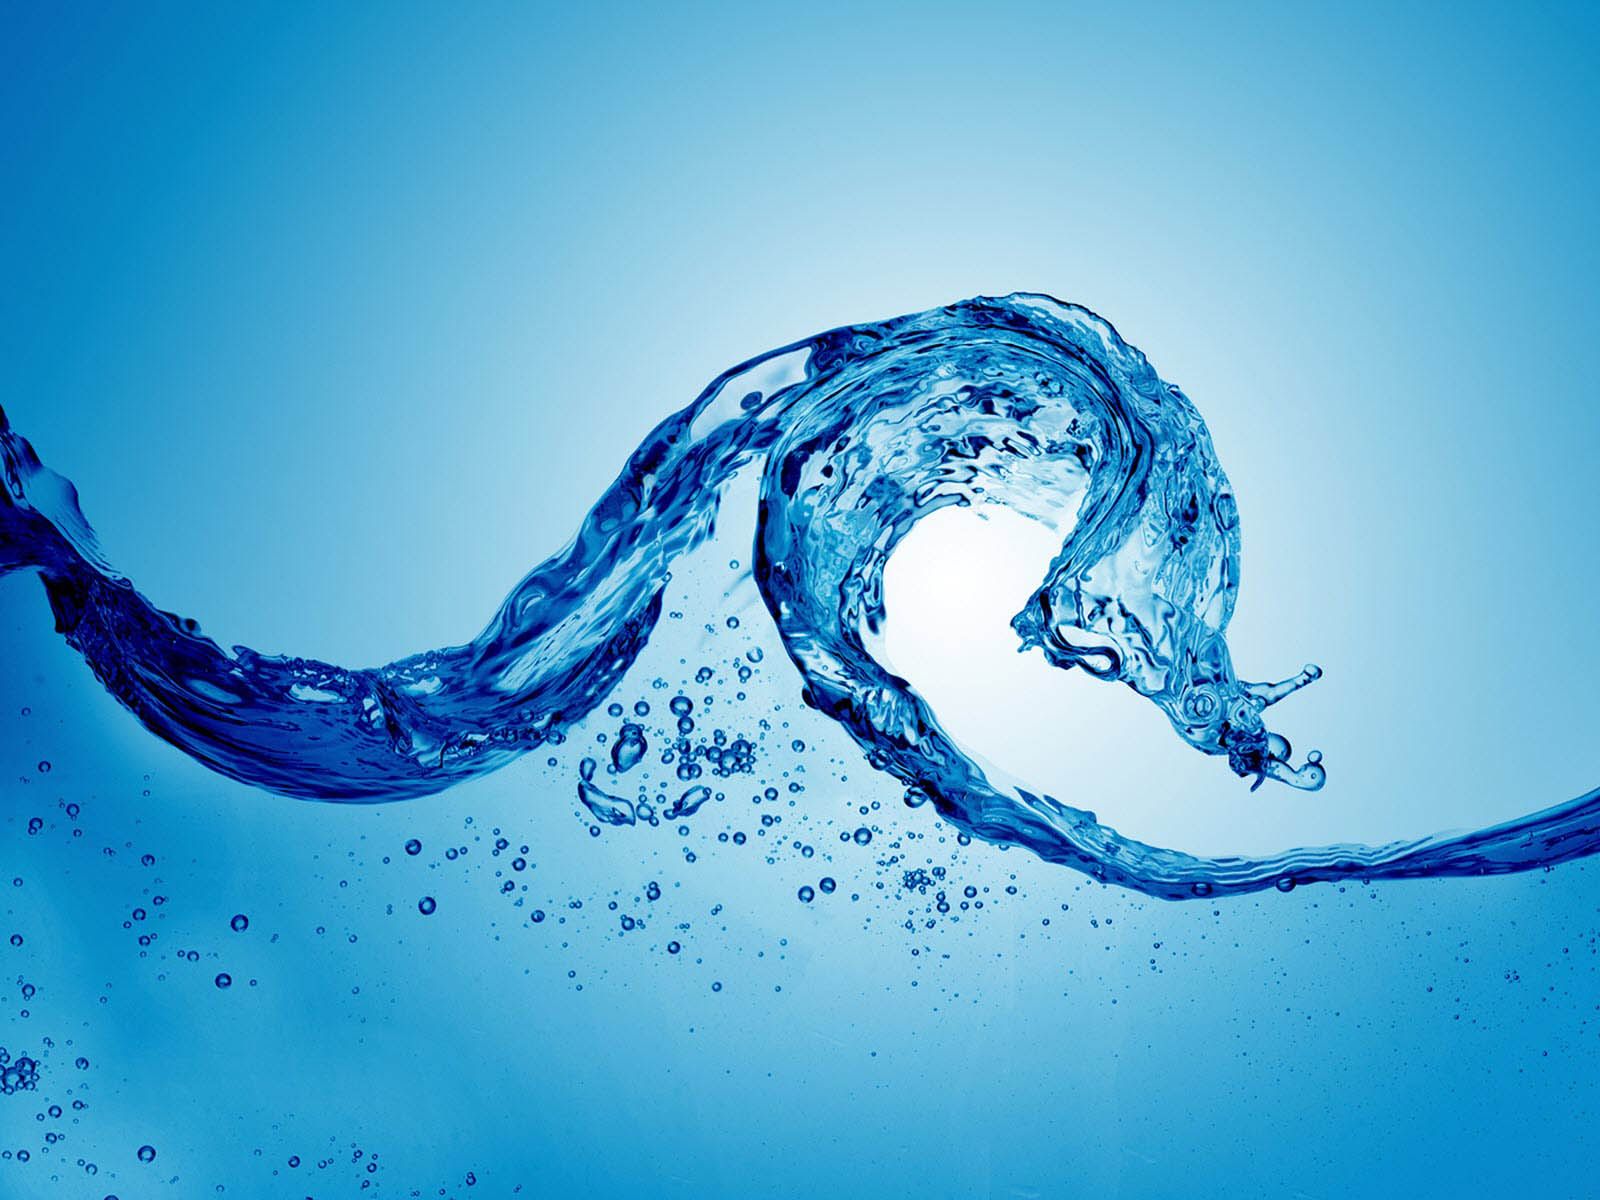 Awesome Water Background wallpaper | 1600x1200 | #33177